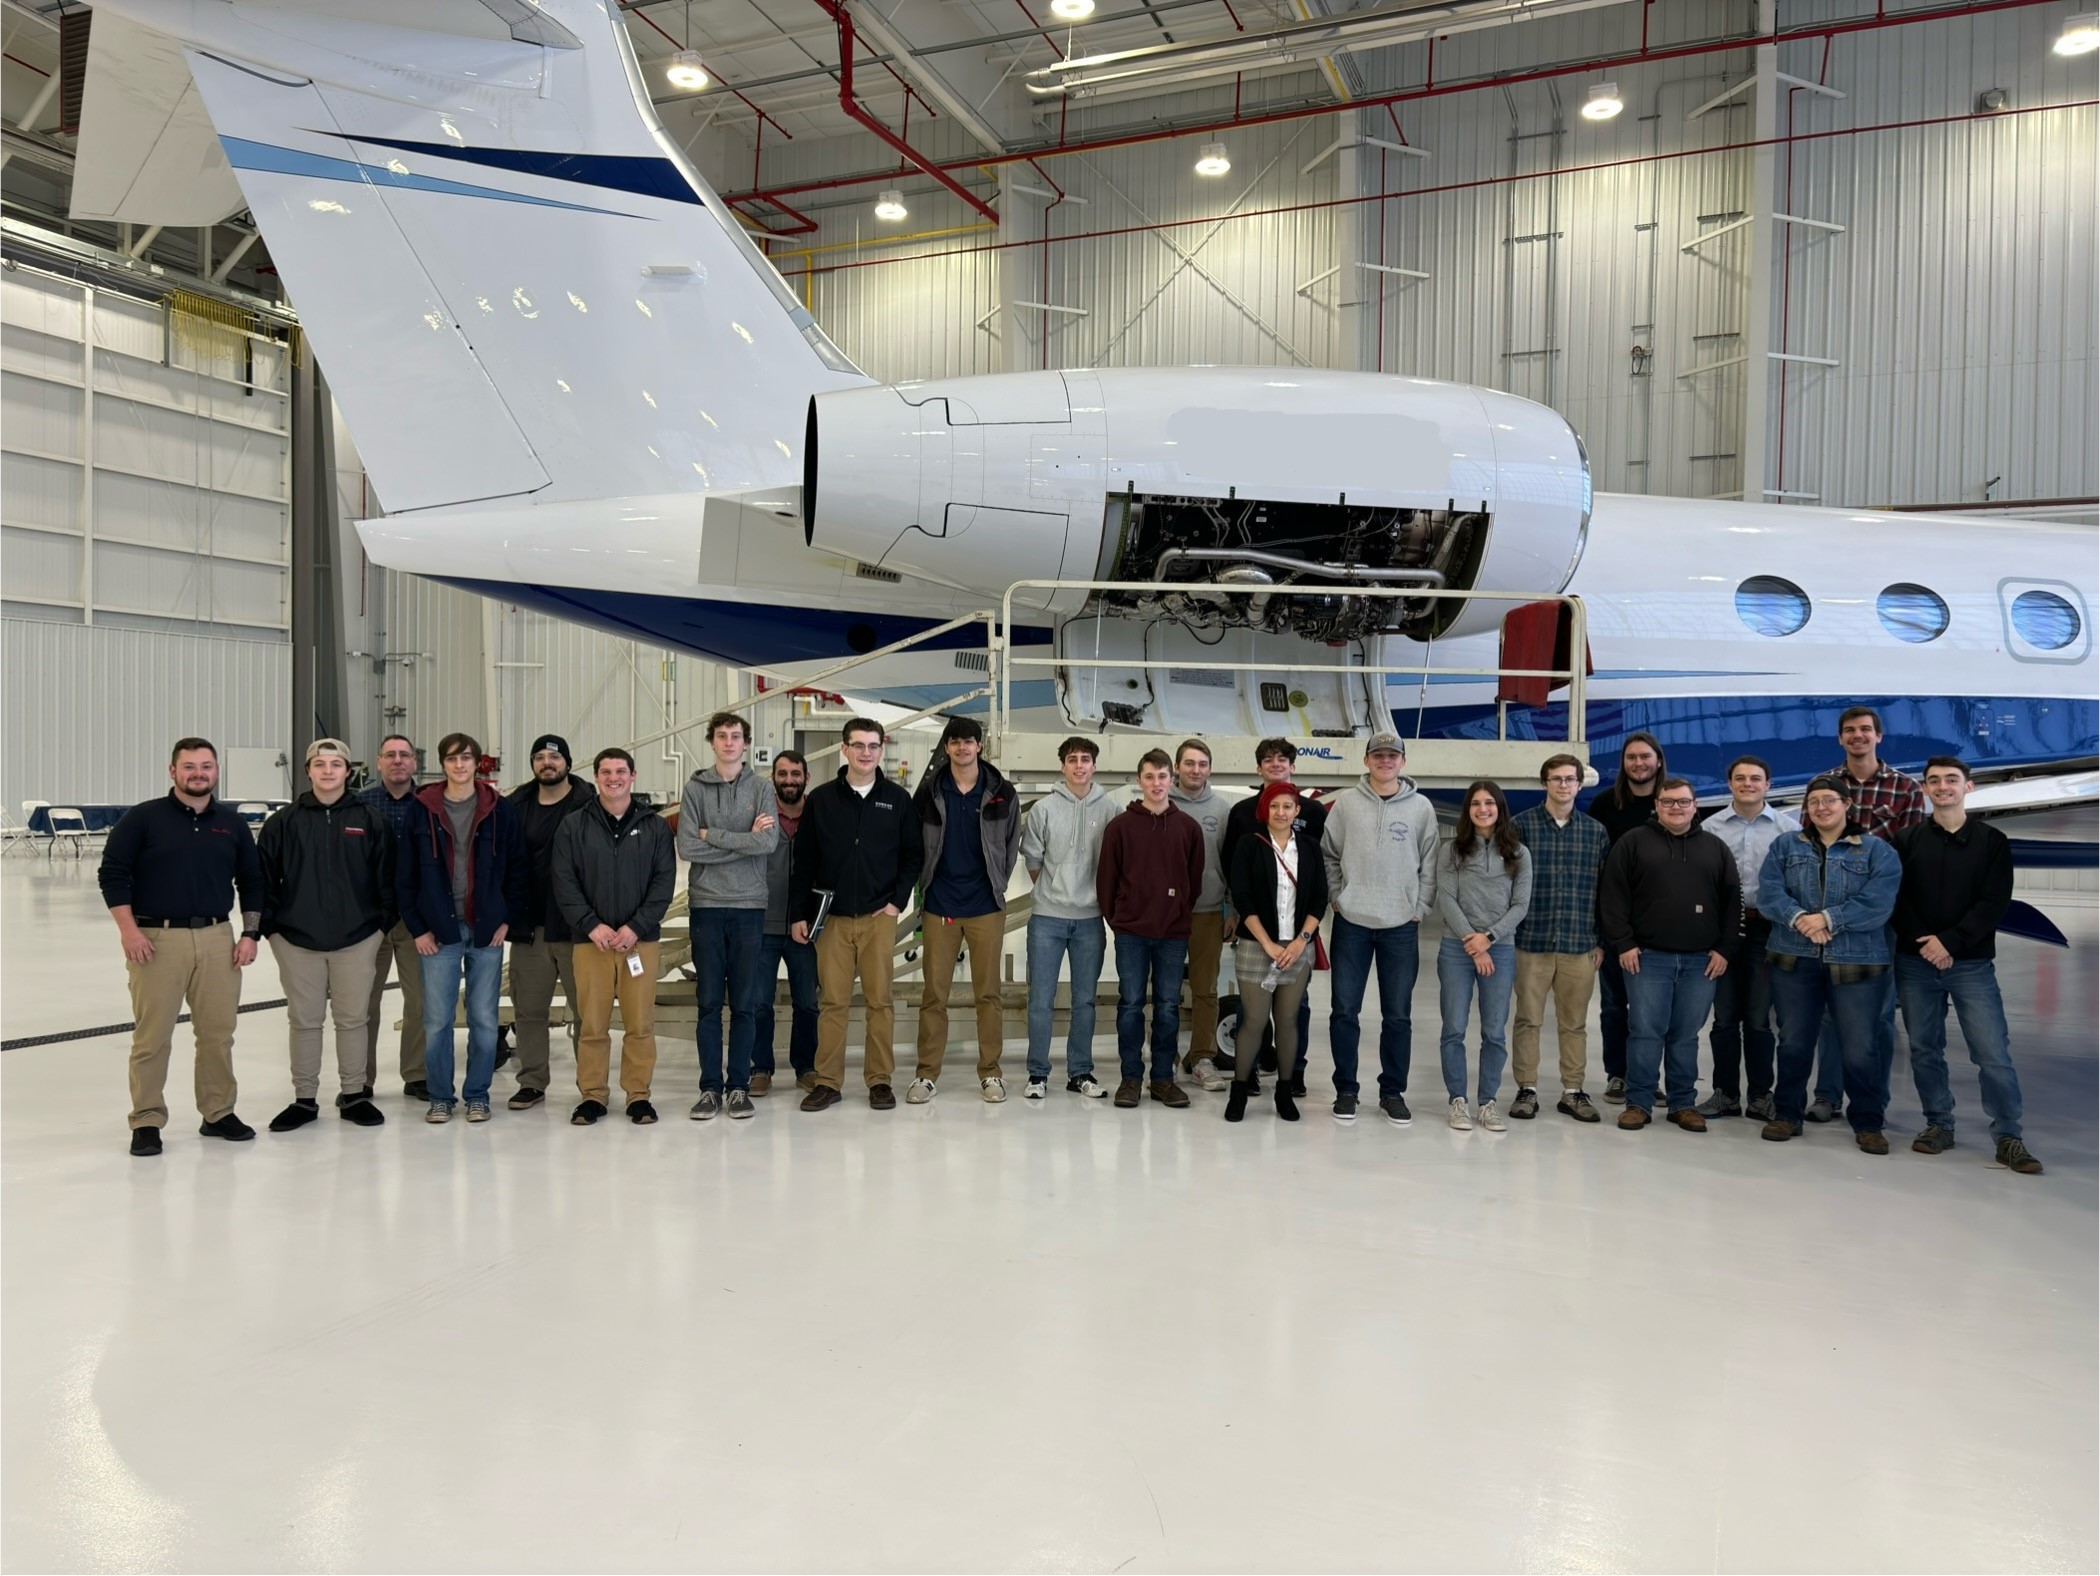 Alumni-led tour directs students' eyes to corporate aviation